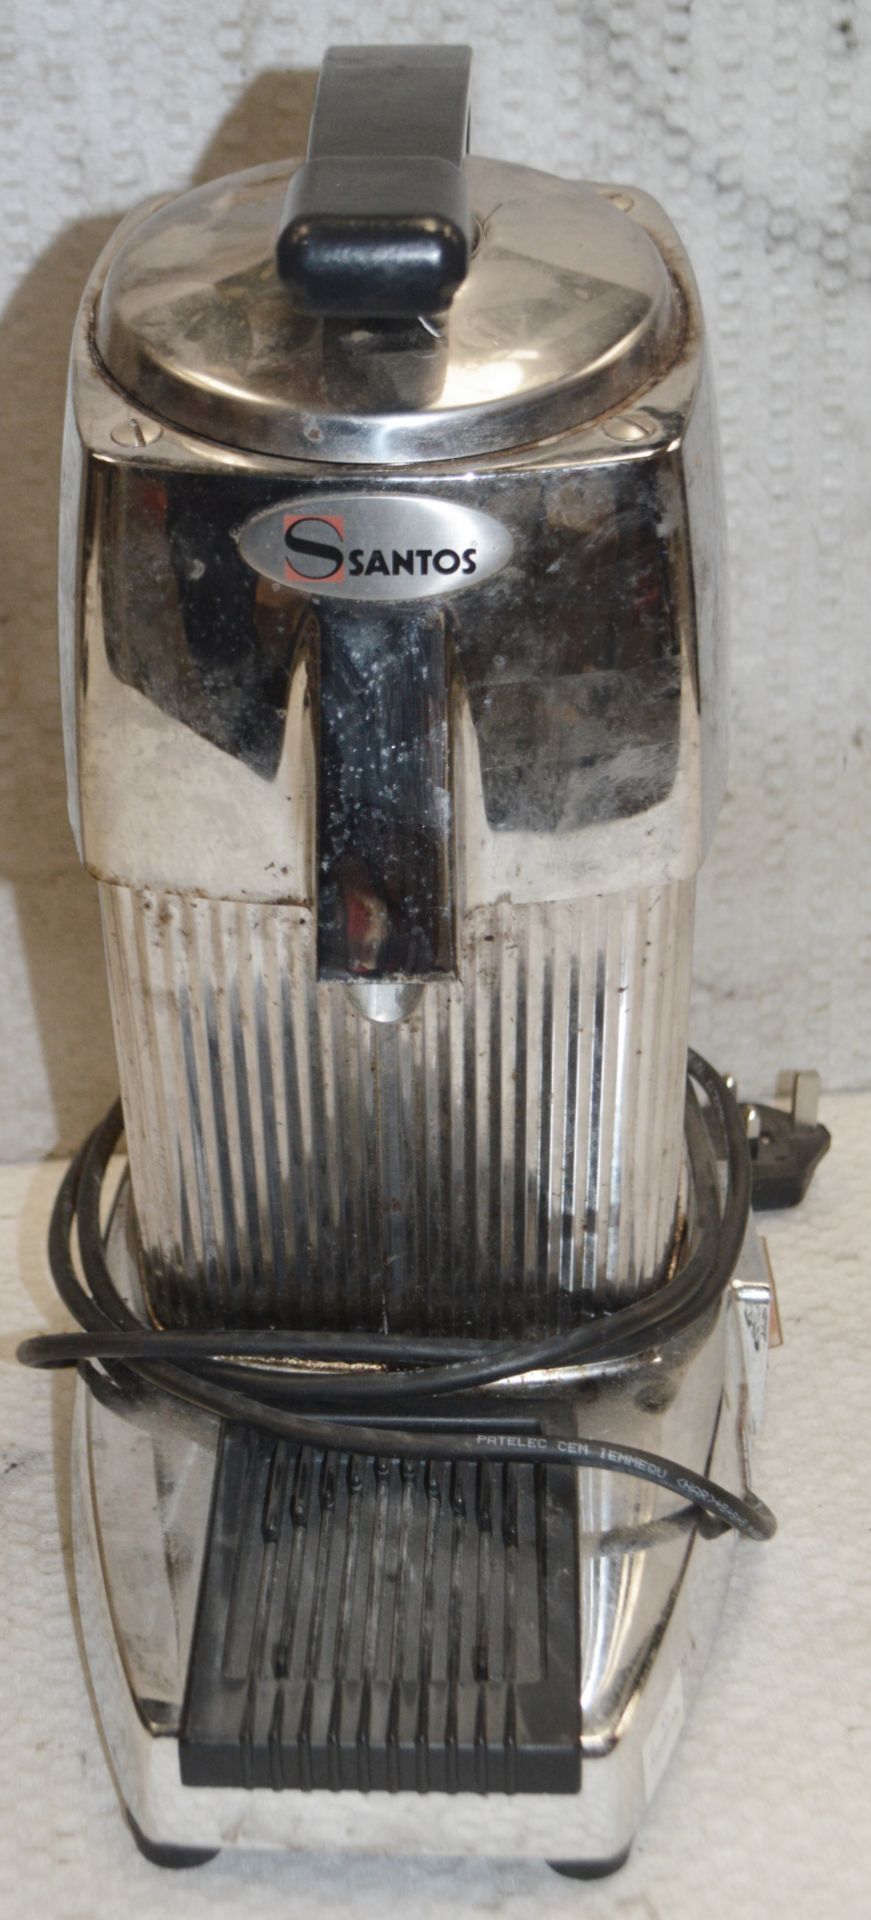 1 x Santos French Handmade Juicer - (220-240volts) - Recently Removed From A Commercial Restaurant - Image 6 of 13